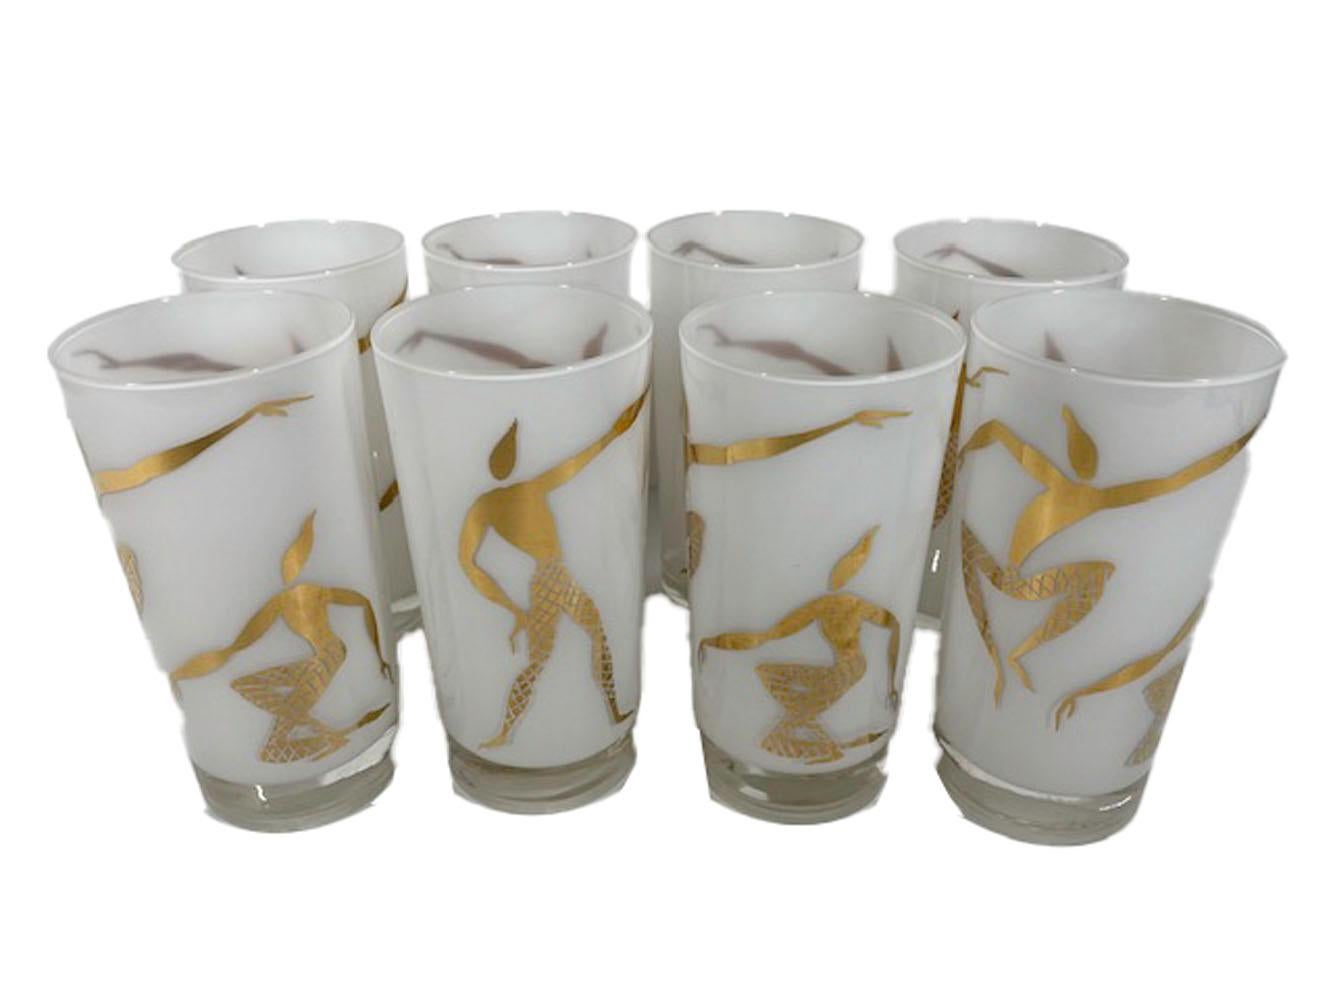 Set of Mid-Century Highball Glasses with White Frosted Interiors & Gold Dancers In Good Condition For Sale In Nantucket, MA